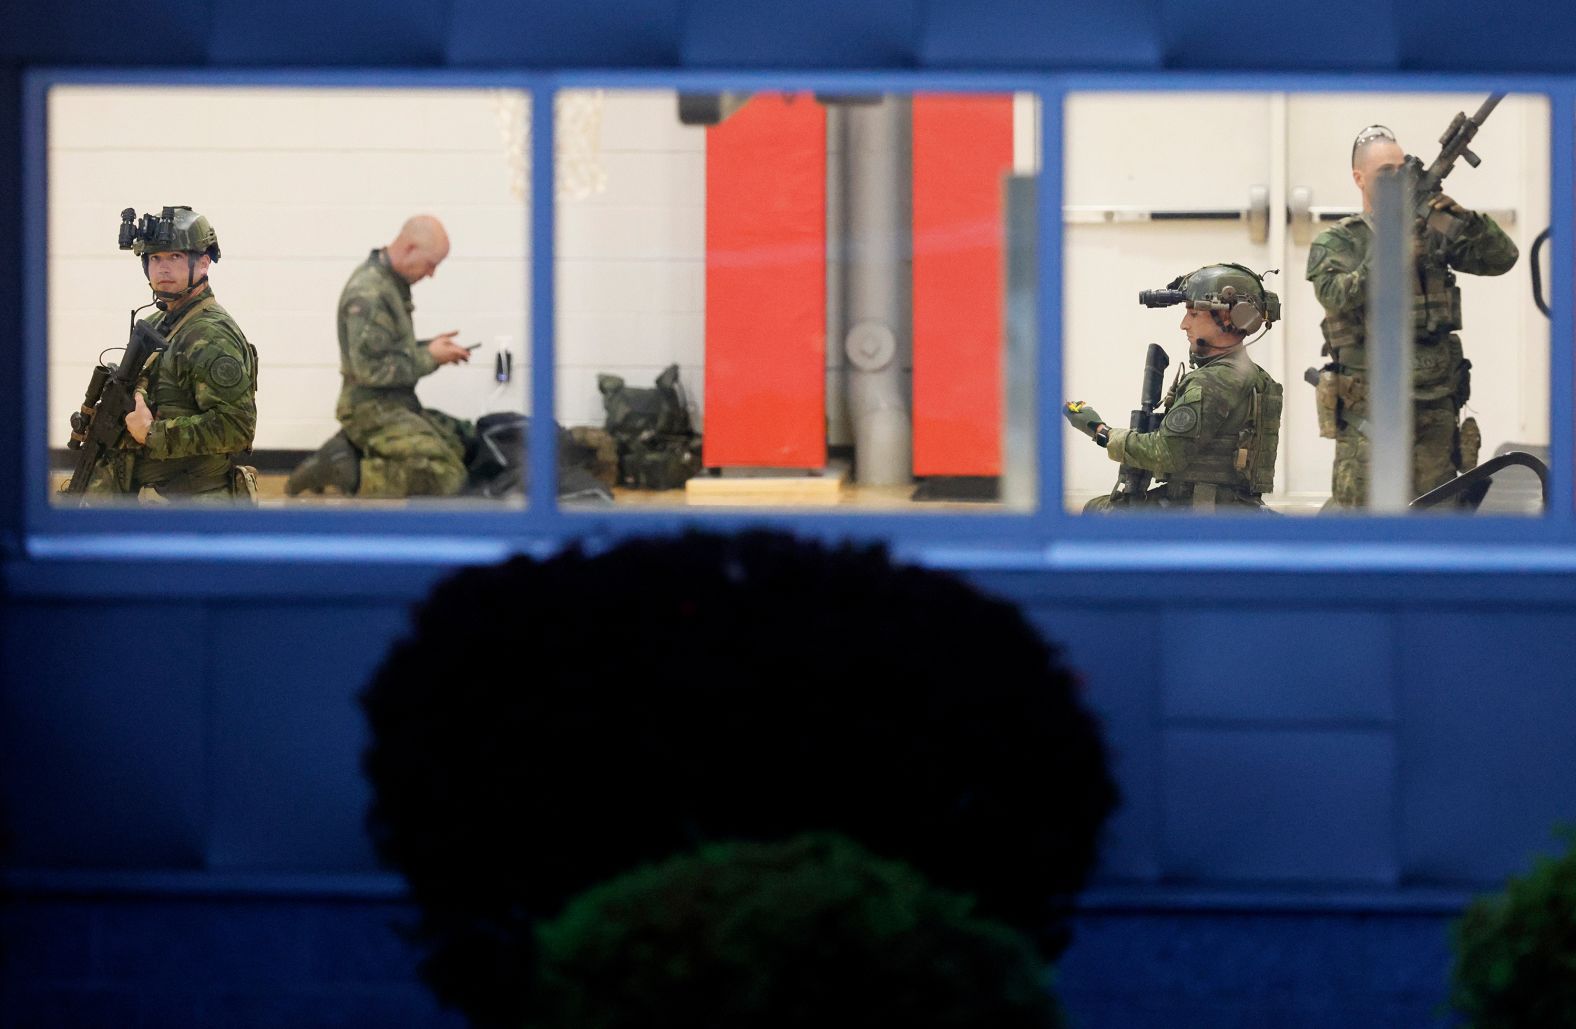 Law enforcement officials prepare at Lisbon High School at daybreak on Thursday, as a manhunt resumes for the suspect in the mass shootings in Lewiston, Maine.